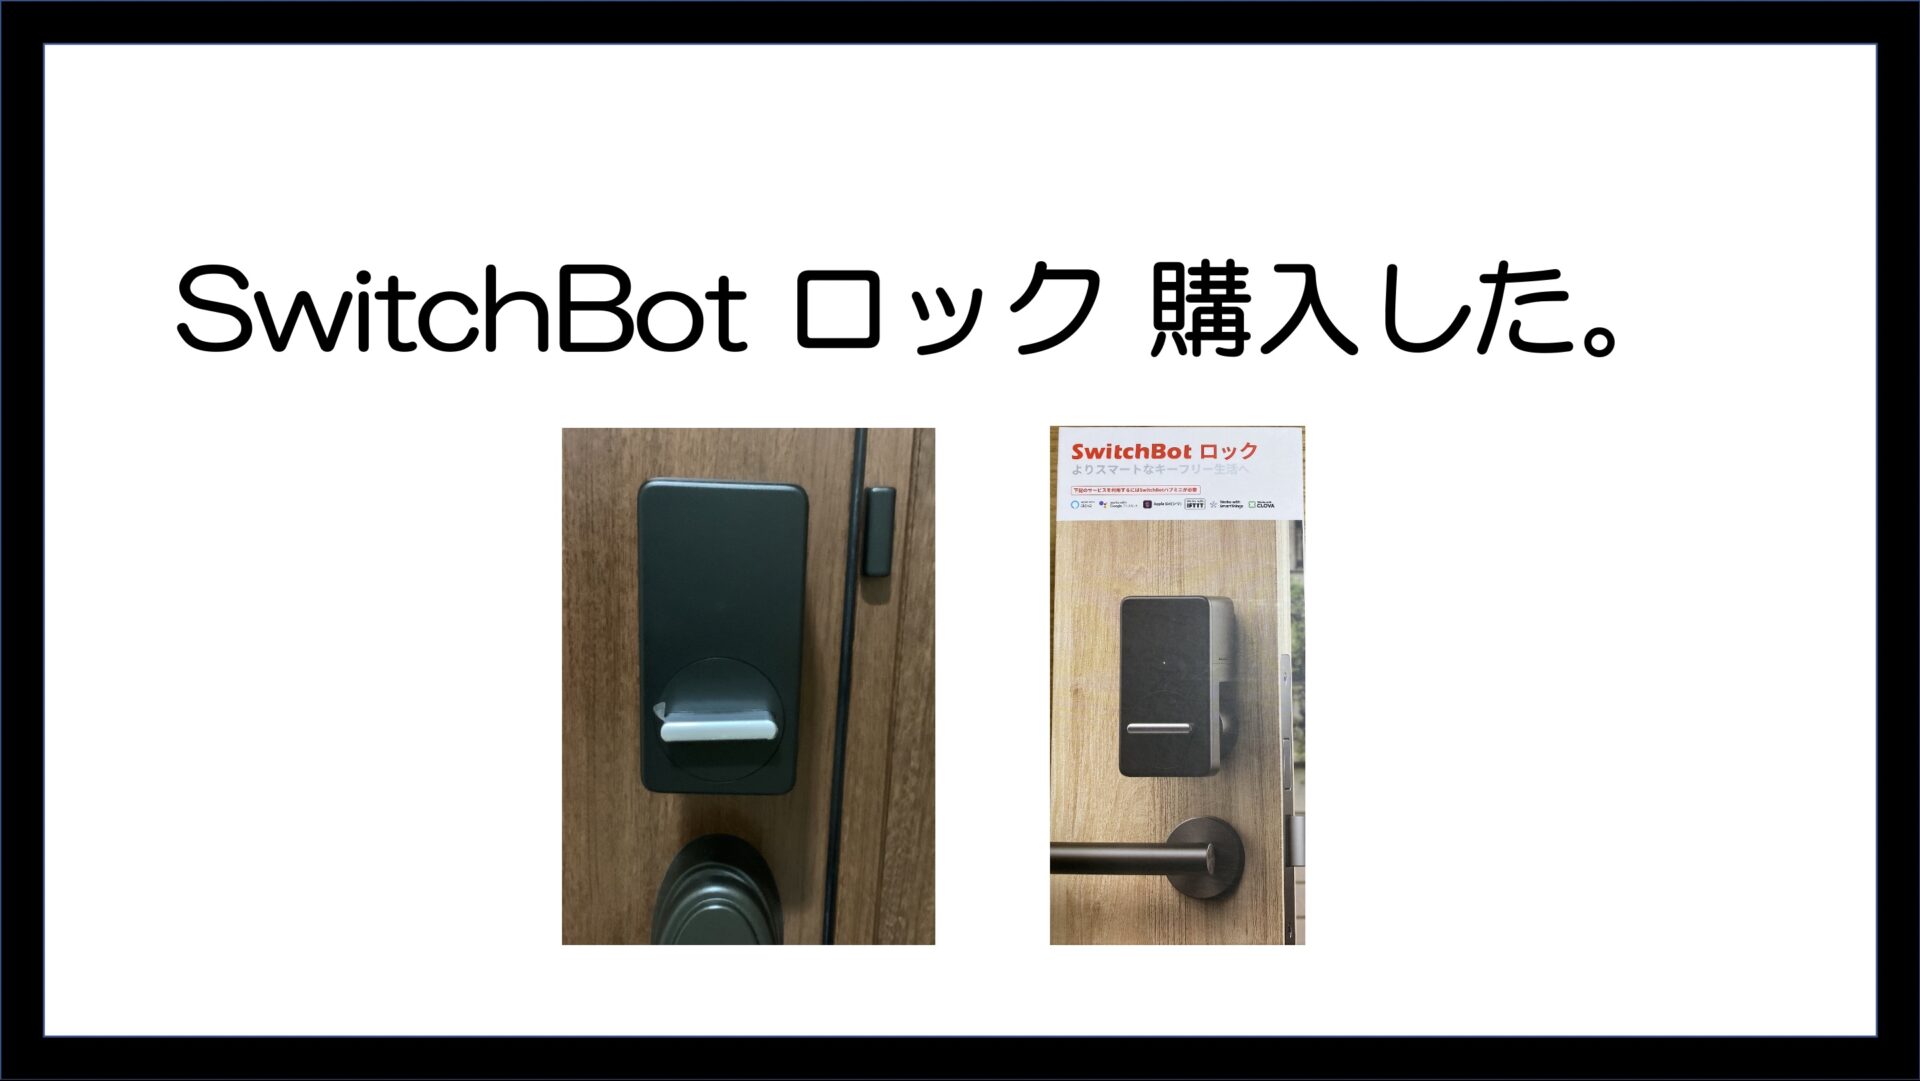 SwitchBot ロック 購入した｜島一ブログ